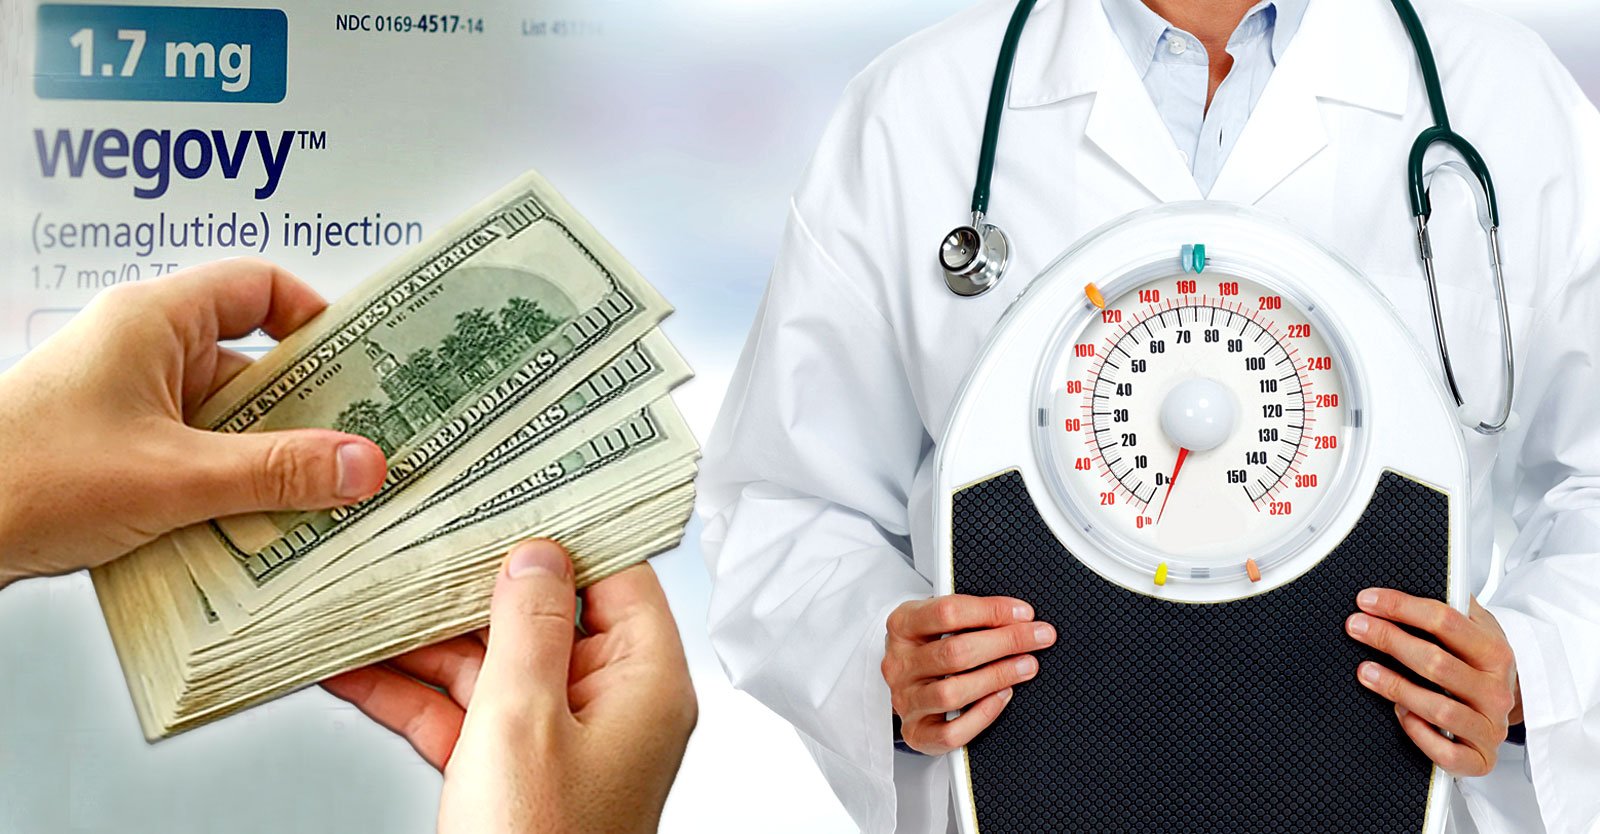 Pharma Giant Paid ‘Elite’ Obesity Specialists $25.8 Million To Promote Weight Loss Drugs